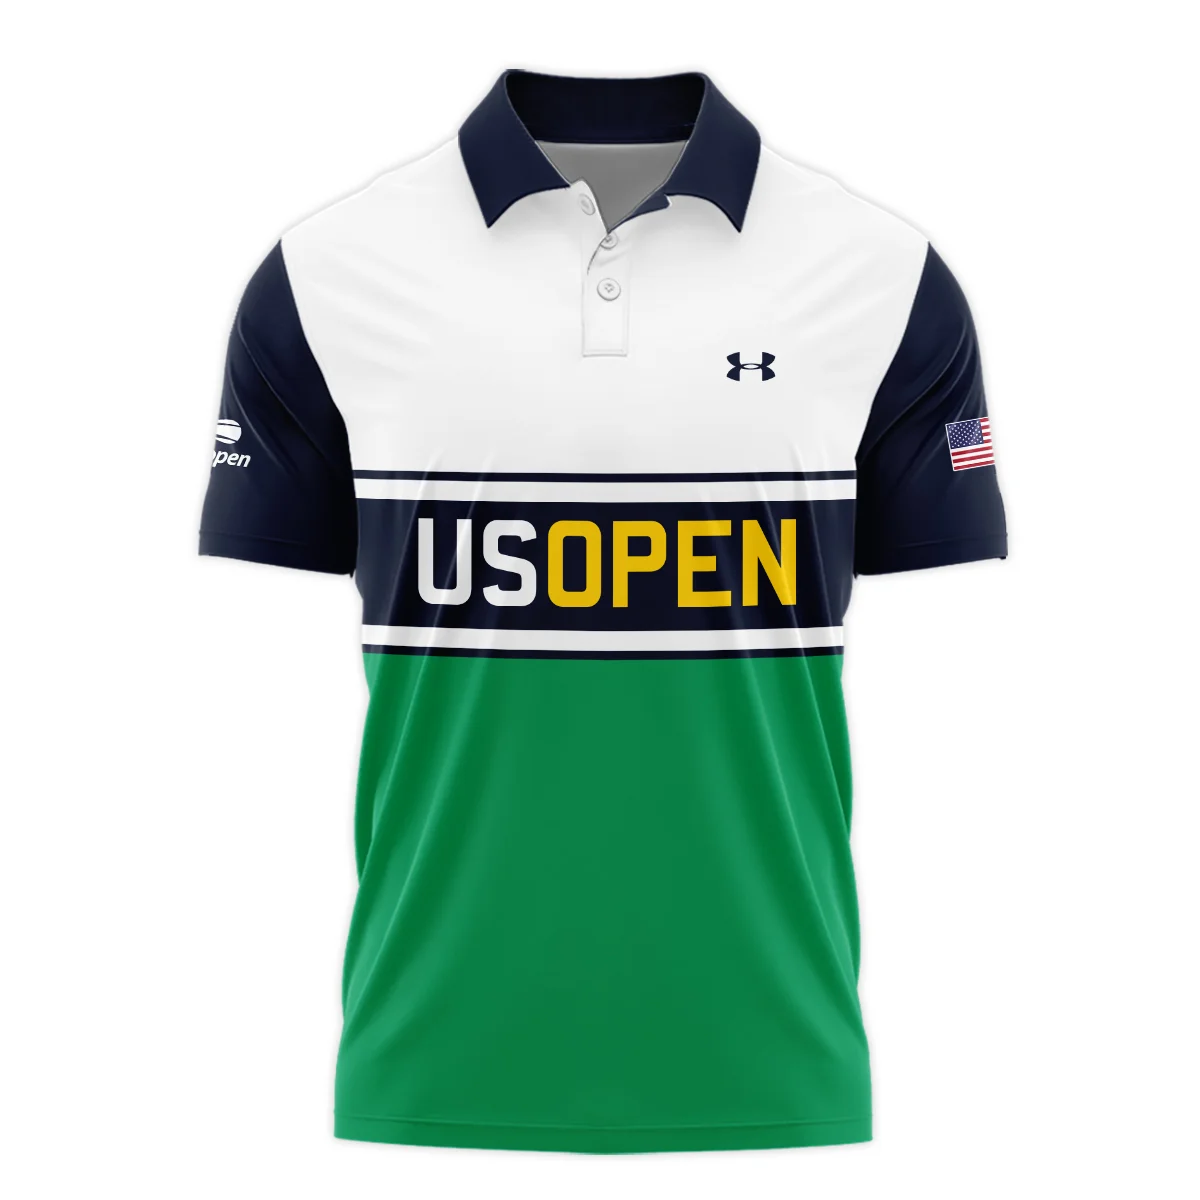 Tennis Love Sport Mix Color US Open Tennis Champions Under Armour Polo Shirt Style Classic Polo Shirt For Men